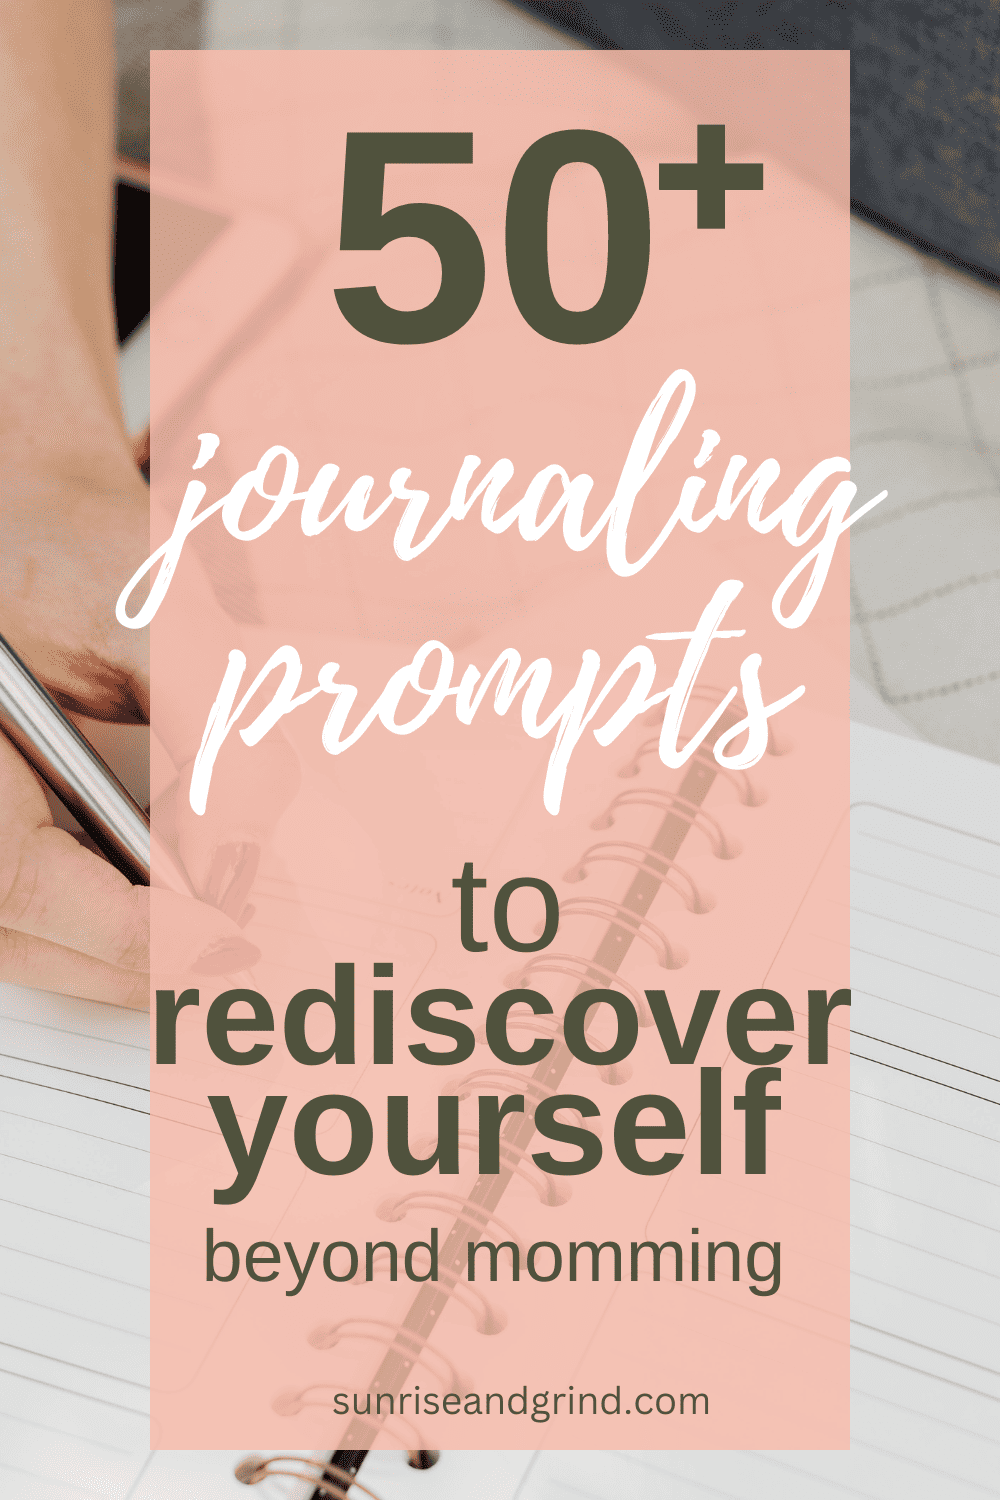 rediscover-yourself-journal-prompts